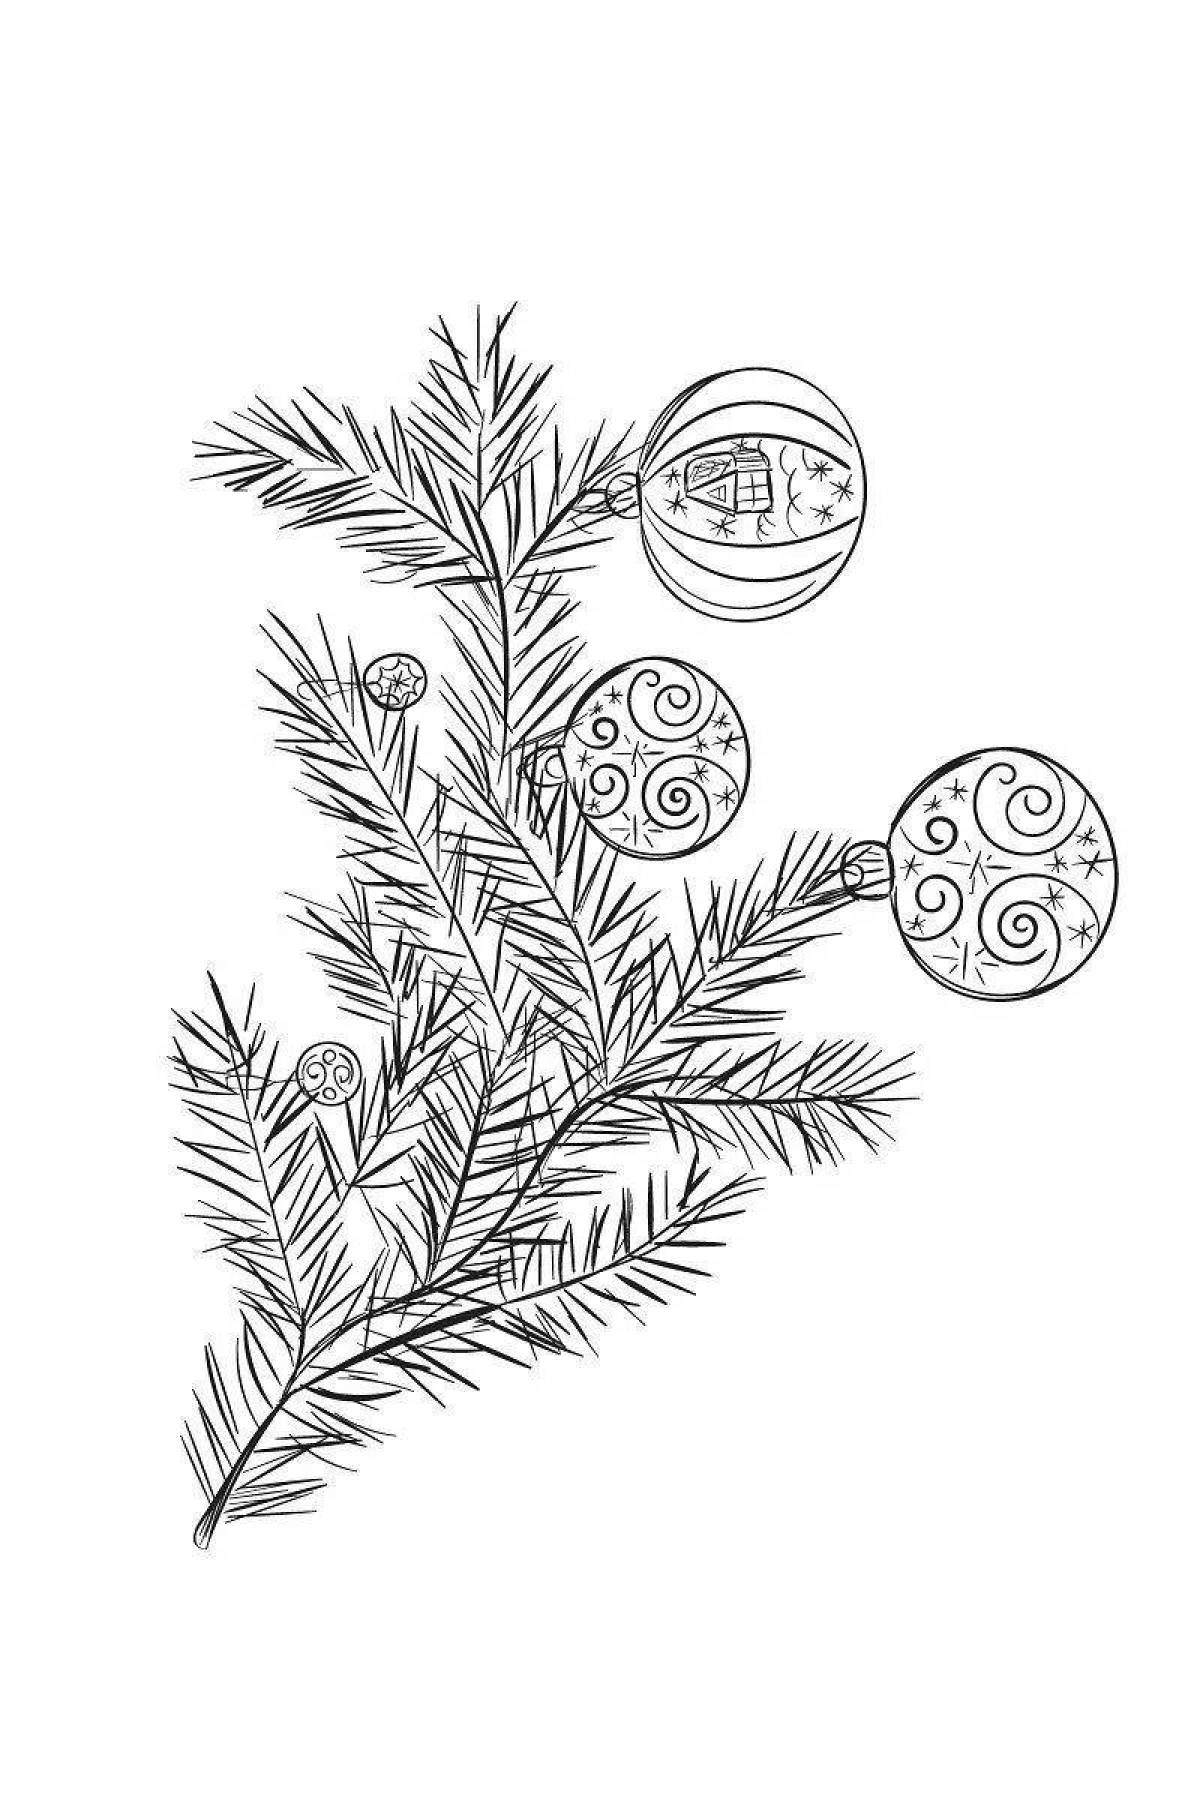 Coloring page charming sprig of spruce